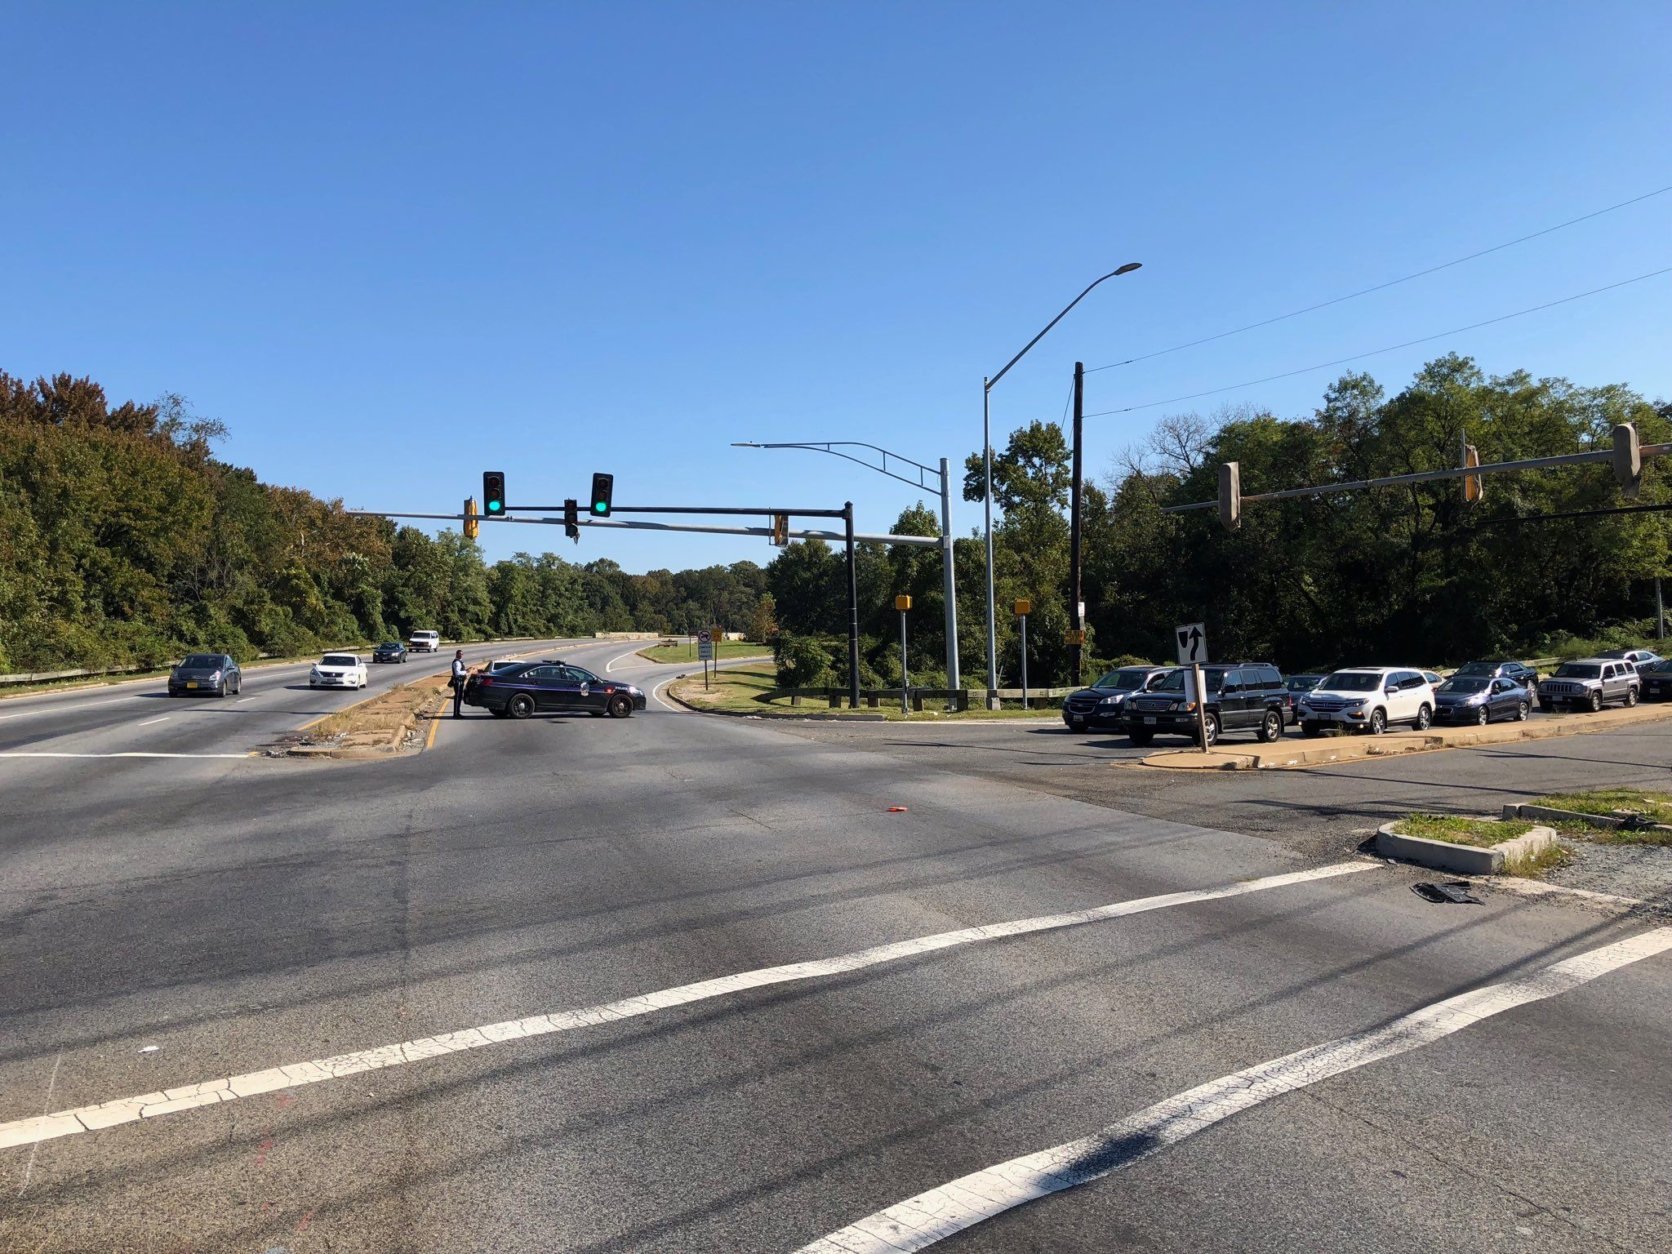 Suitland Parkway in Maryland is closed following a reported shooting Tuesday morning. (WTOP/Kristi King)